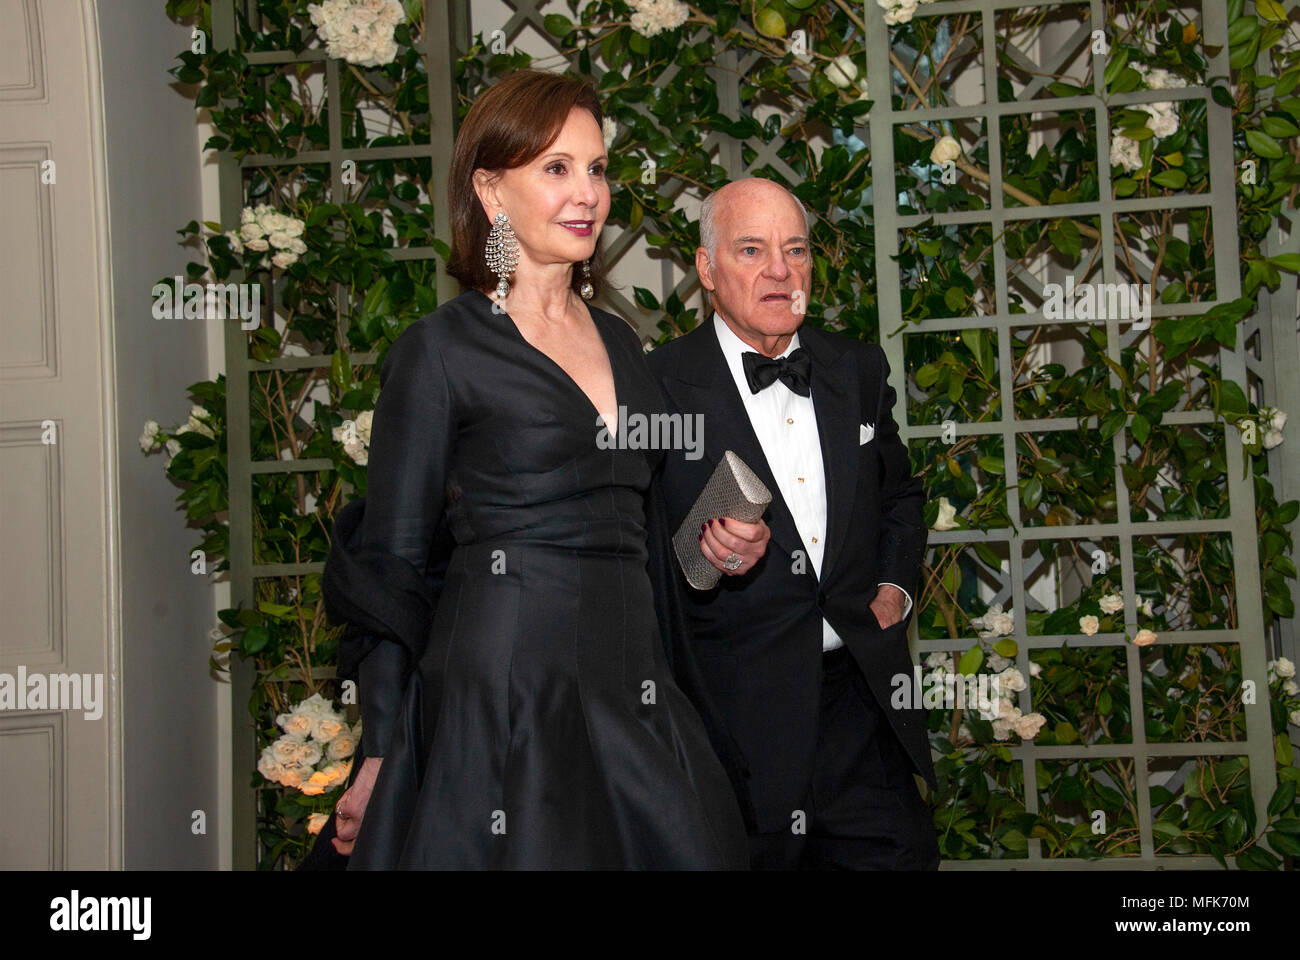 Henry Kravis and Mrs. Marie-Josée Kravis arrive for the State Dinner honoring Dinner honoring President Emmanuel Macron of the French Republic and Mrs. Brigitte Macron at the White House in Washington, DC on Tuesday, April 24, 2018. Credit: Ron Sachs/CNP - NO WIRE SERVICE - Photo: Ron Sachs/Consolidated News Photos/Ron Sachs - CNP Stock Photo